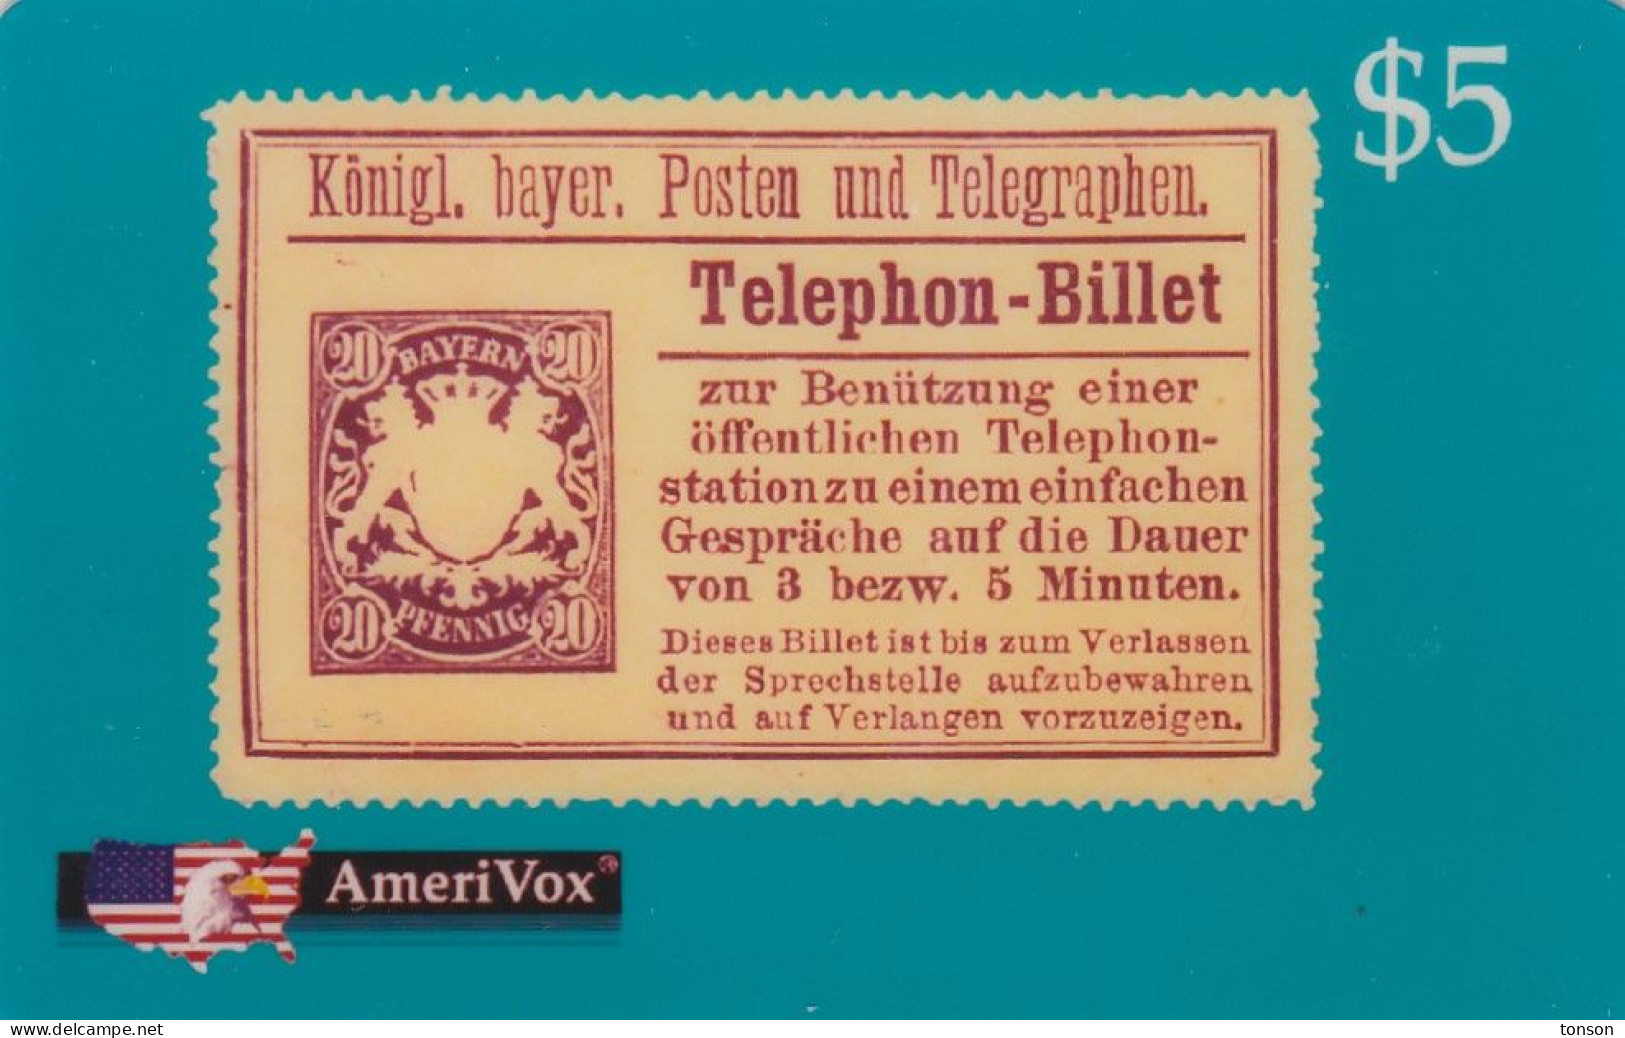 United States, SKU-23600, German Telephone Stamp, Mint, Only 1000 Issued, 2 Scans.  Special Offer. - Amerivox